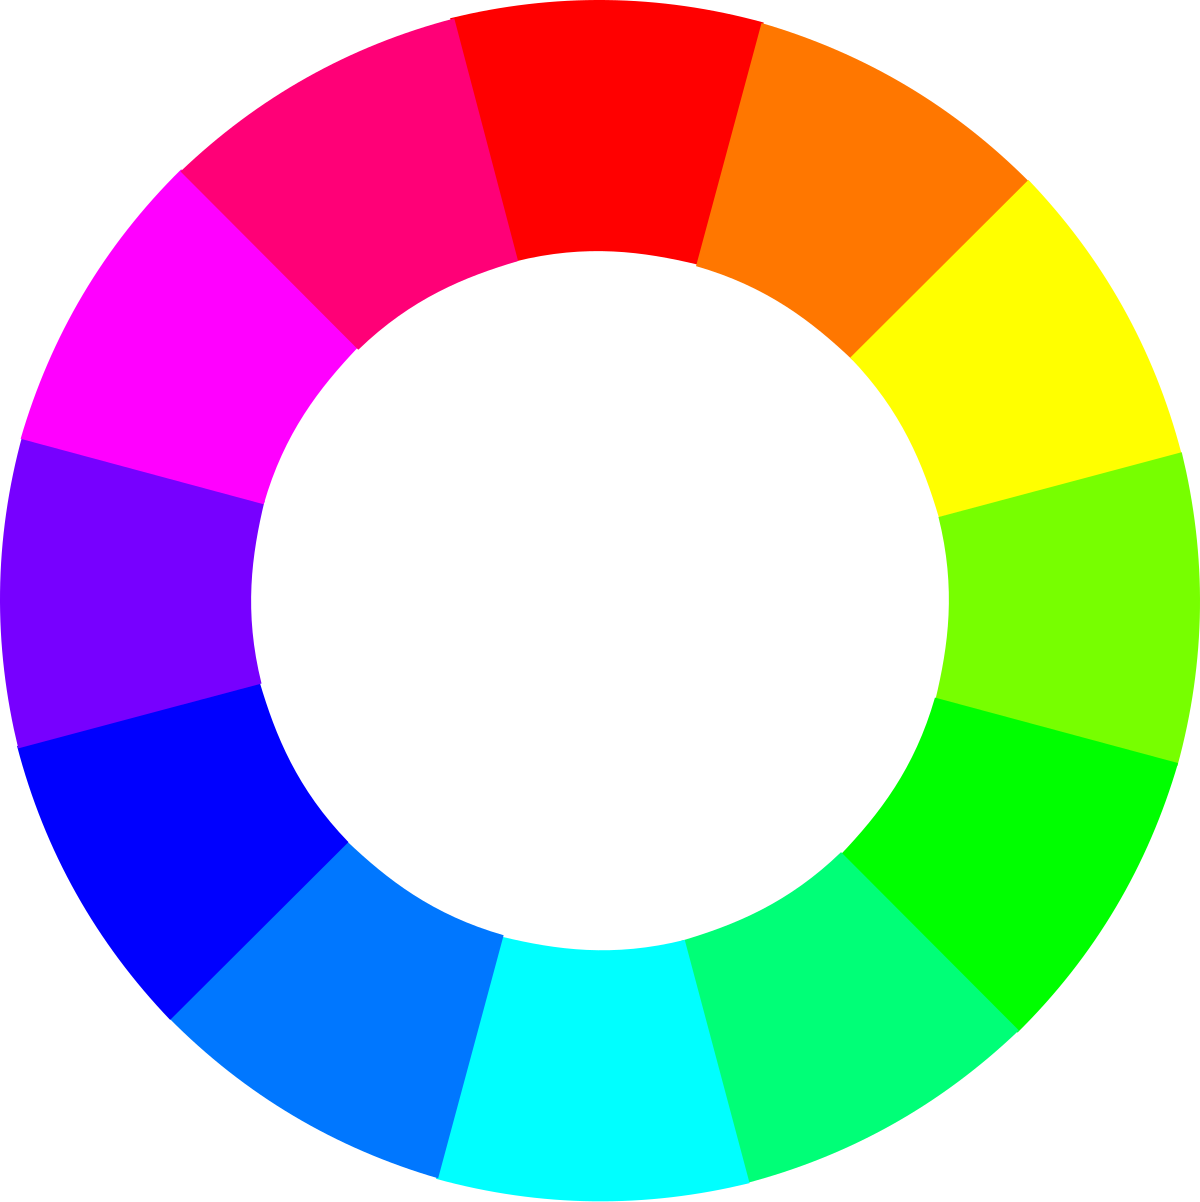 File:Colores opuestos.png - Wikimedia Commons